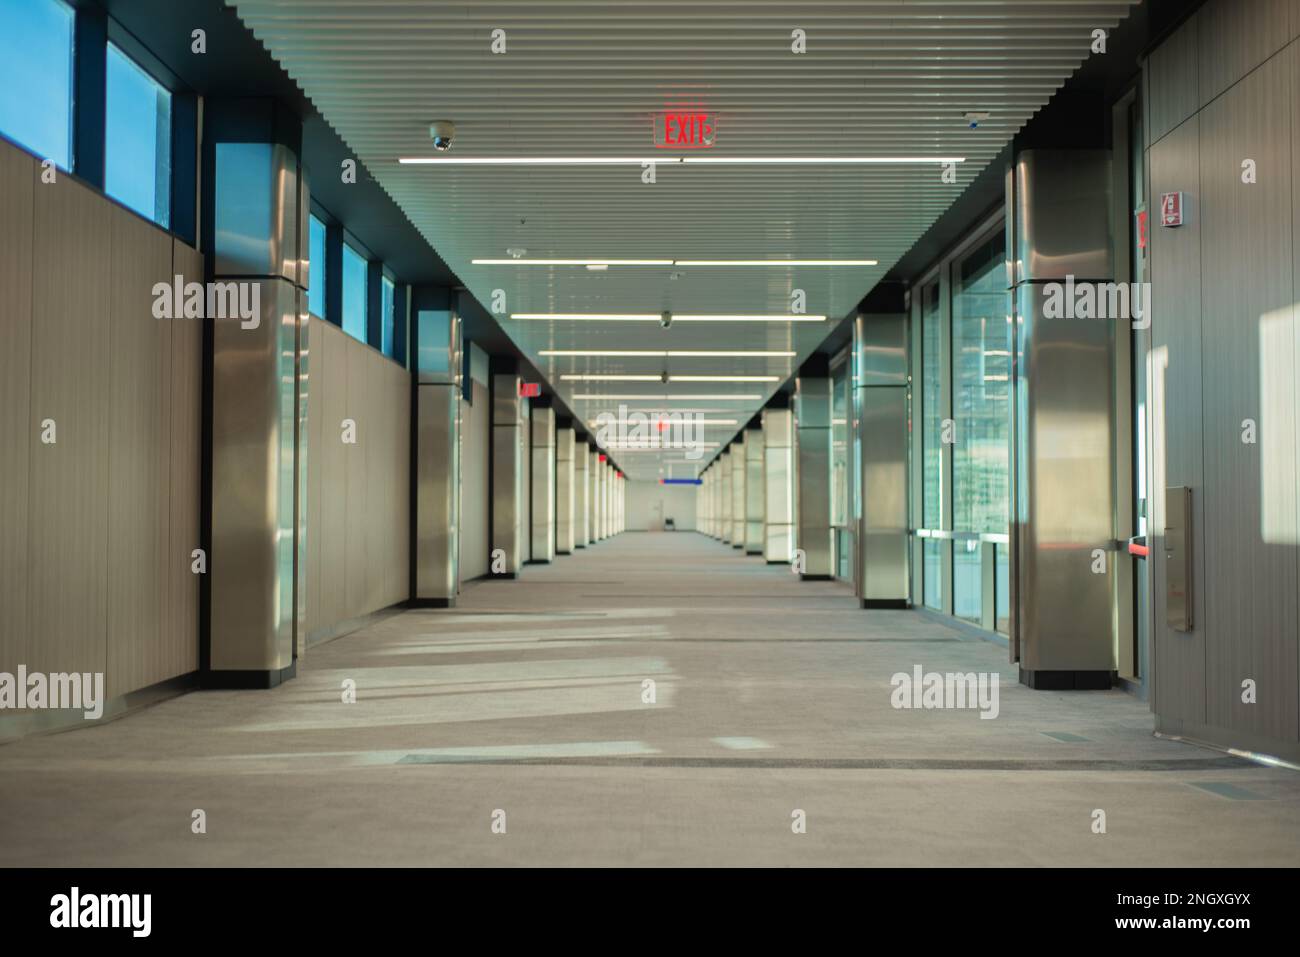 corridor of empty building with exit signs lit in red and windows on one side, no people Stock Photo